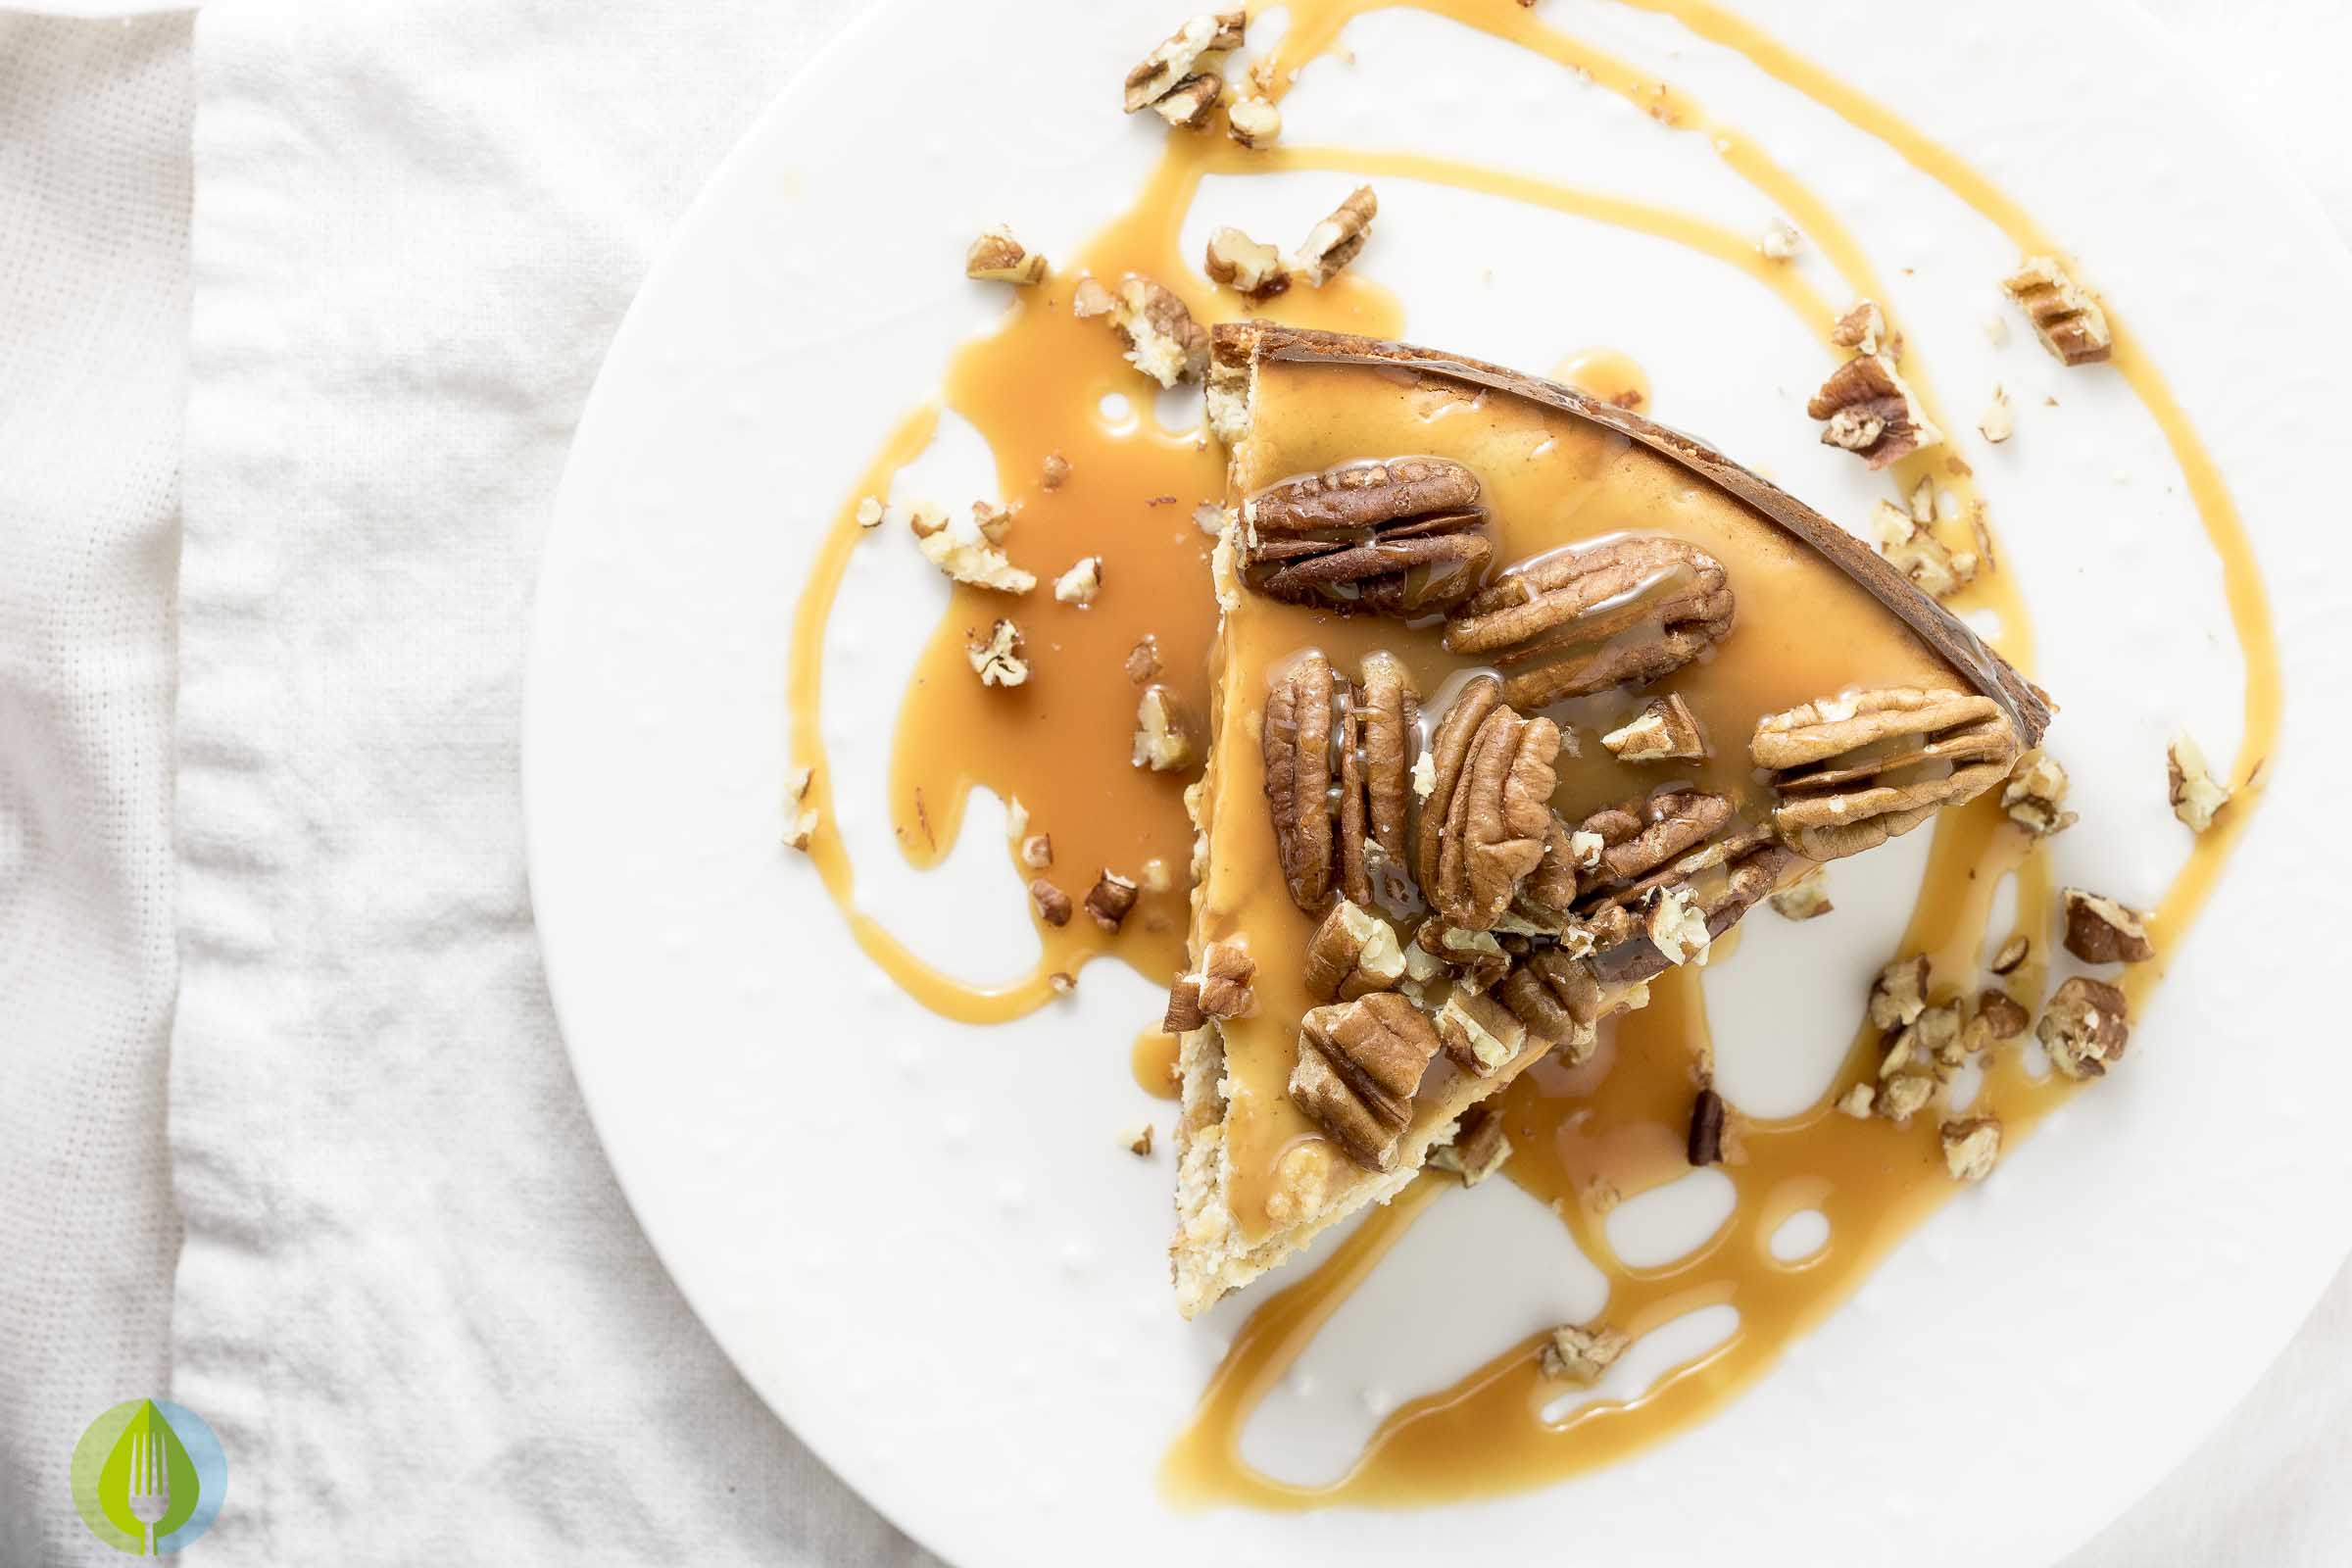 one piece of pecan chesecake on a plate with caramel sauce and pecans